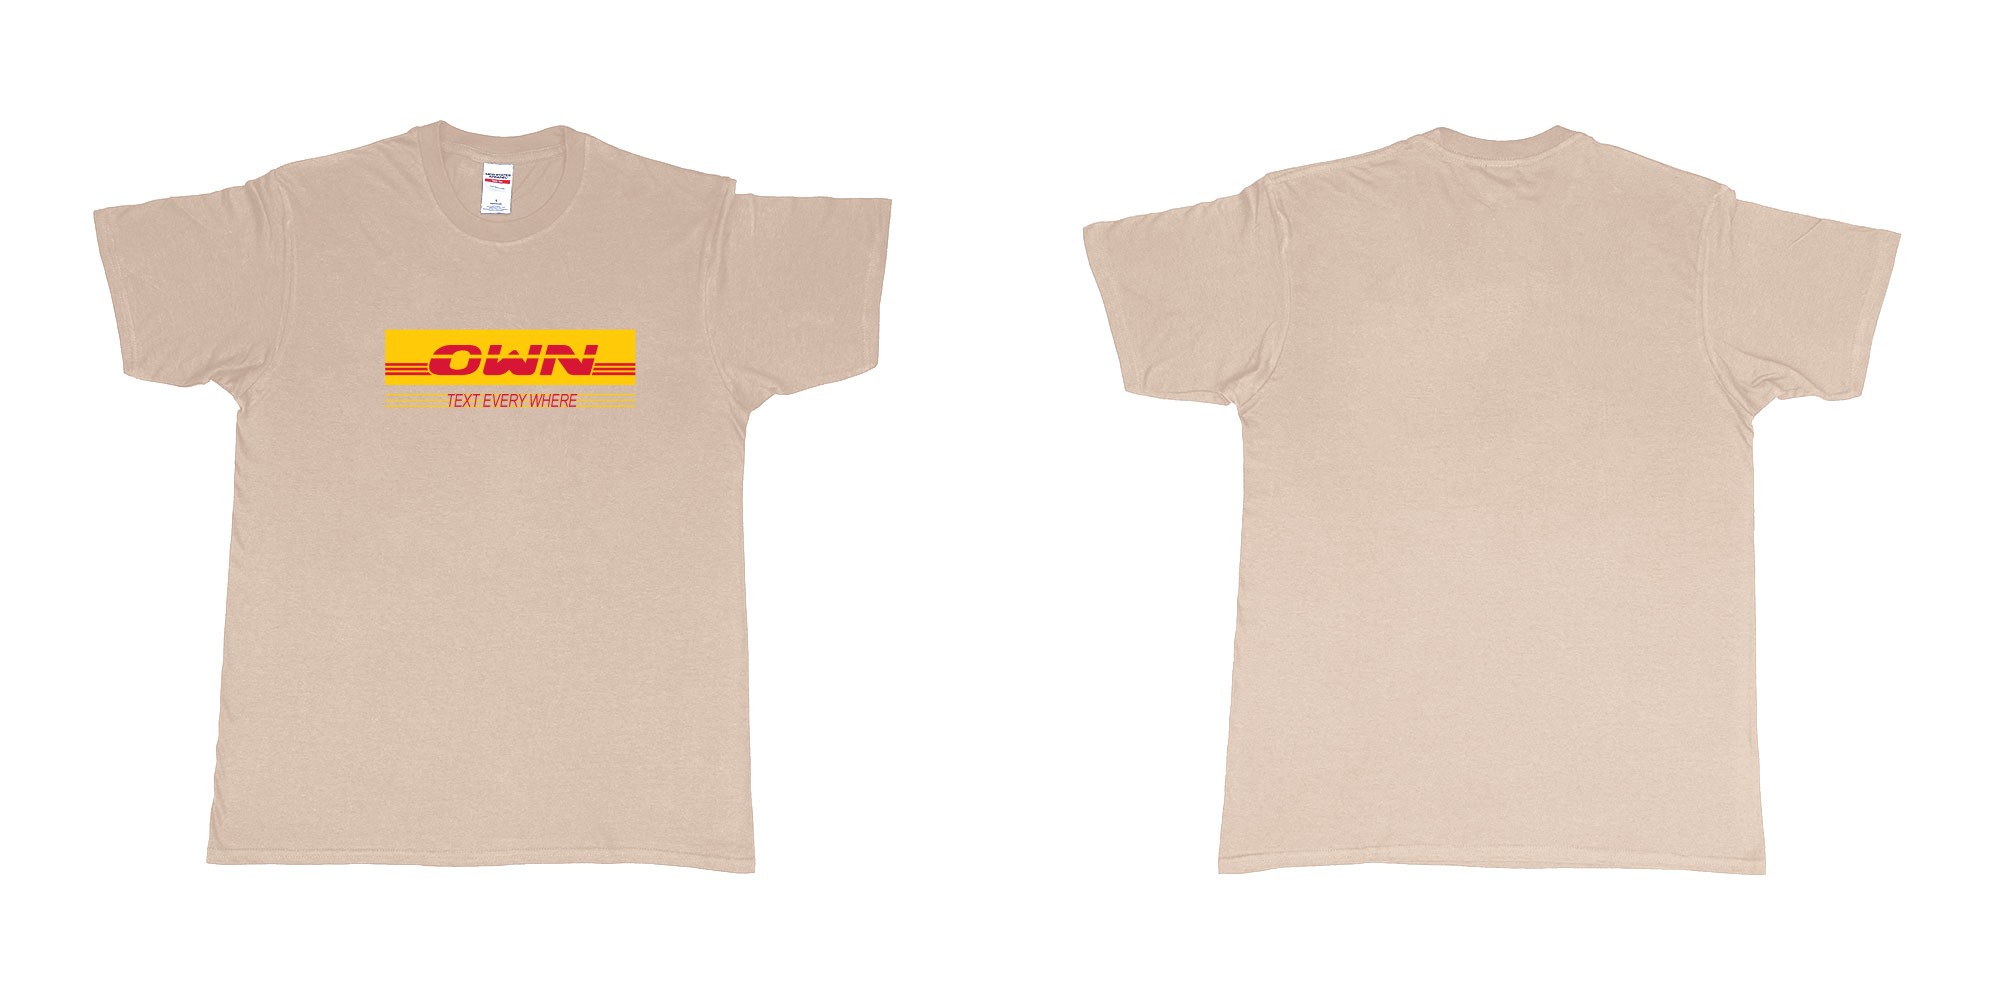 Custom tshirt design DHL in fabric color sand choice your own text made in Bali by The Pirate Way